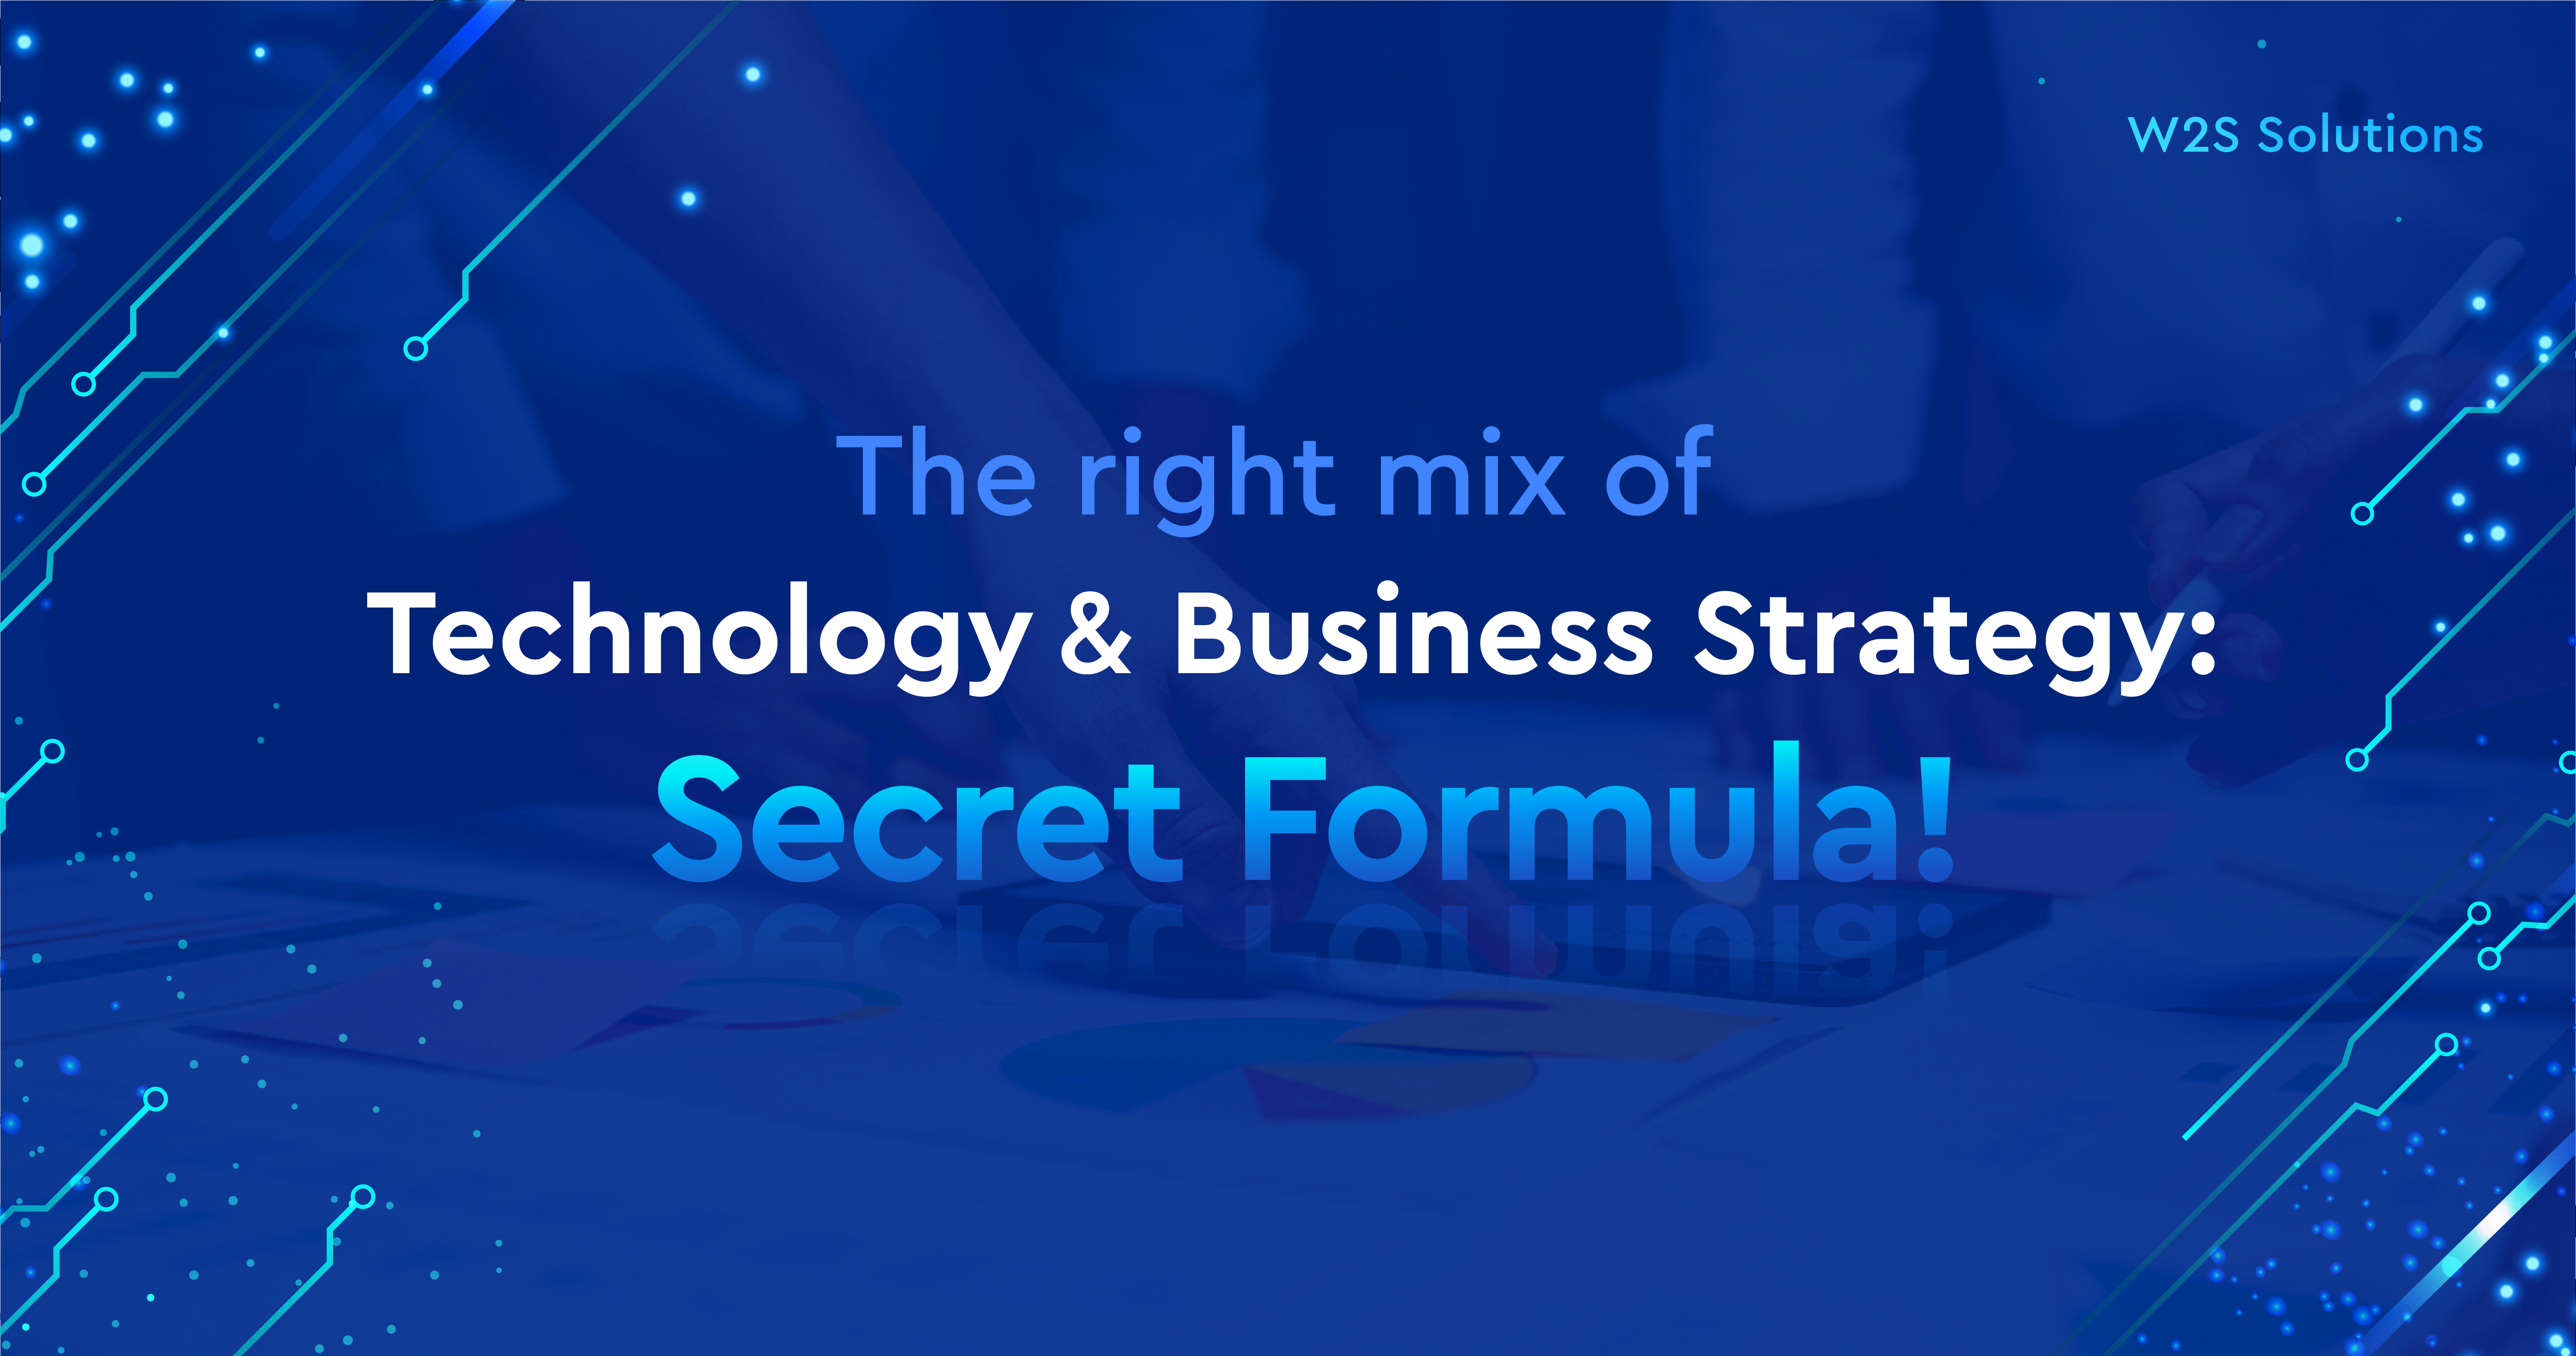 The right mix of technology and business strategy: Secret formula!